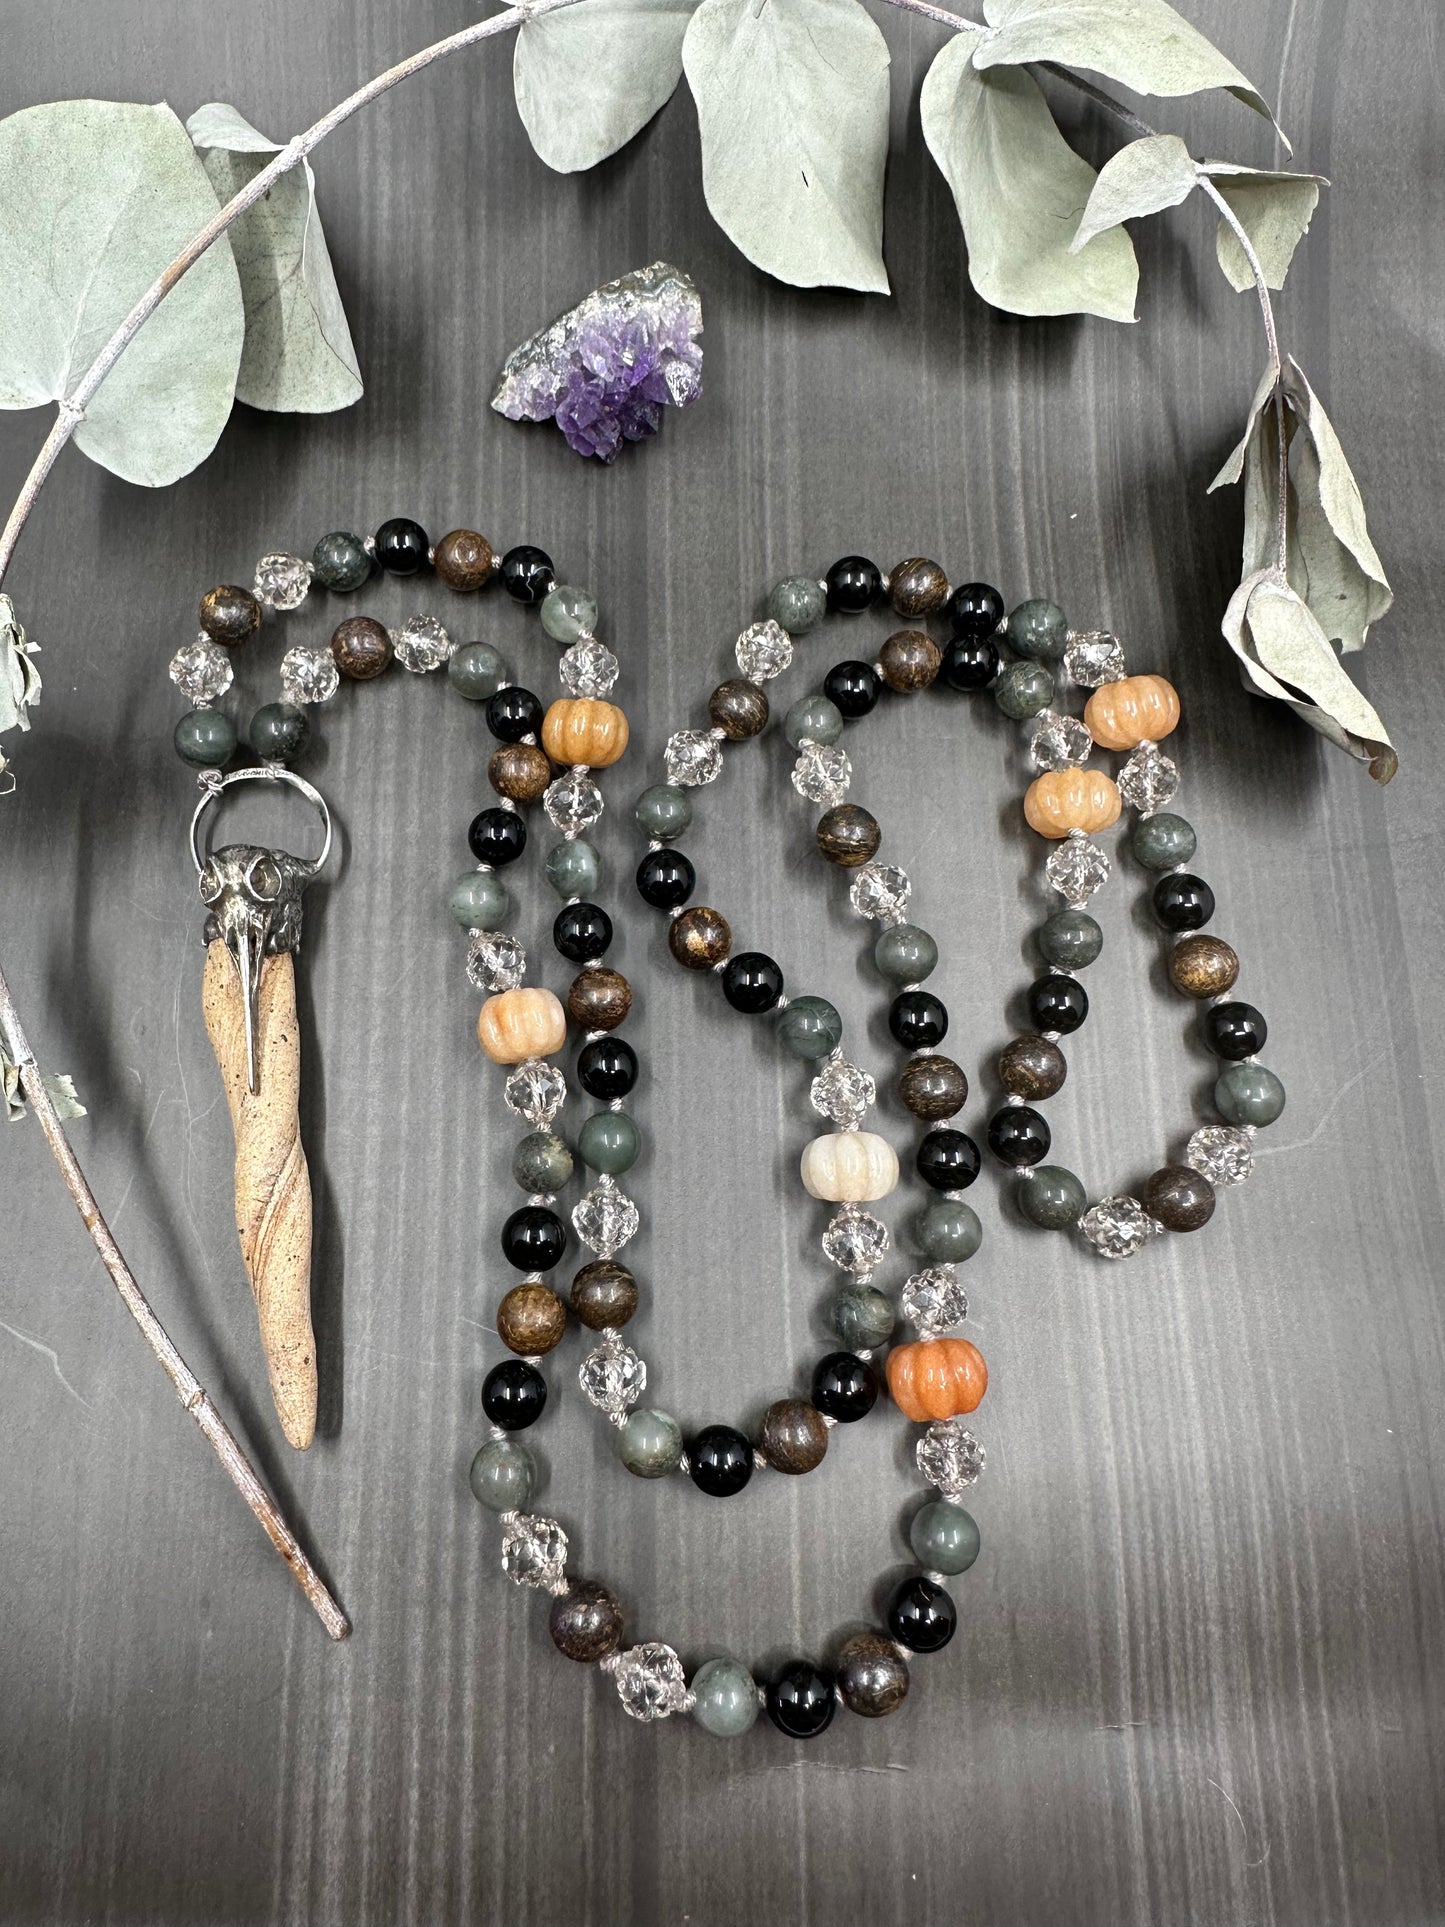 Long Knotted Faux Antler Necklace with Bronzite, Onyx, Glass, and Jade